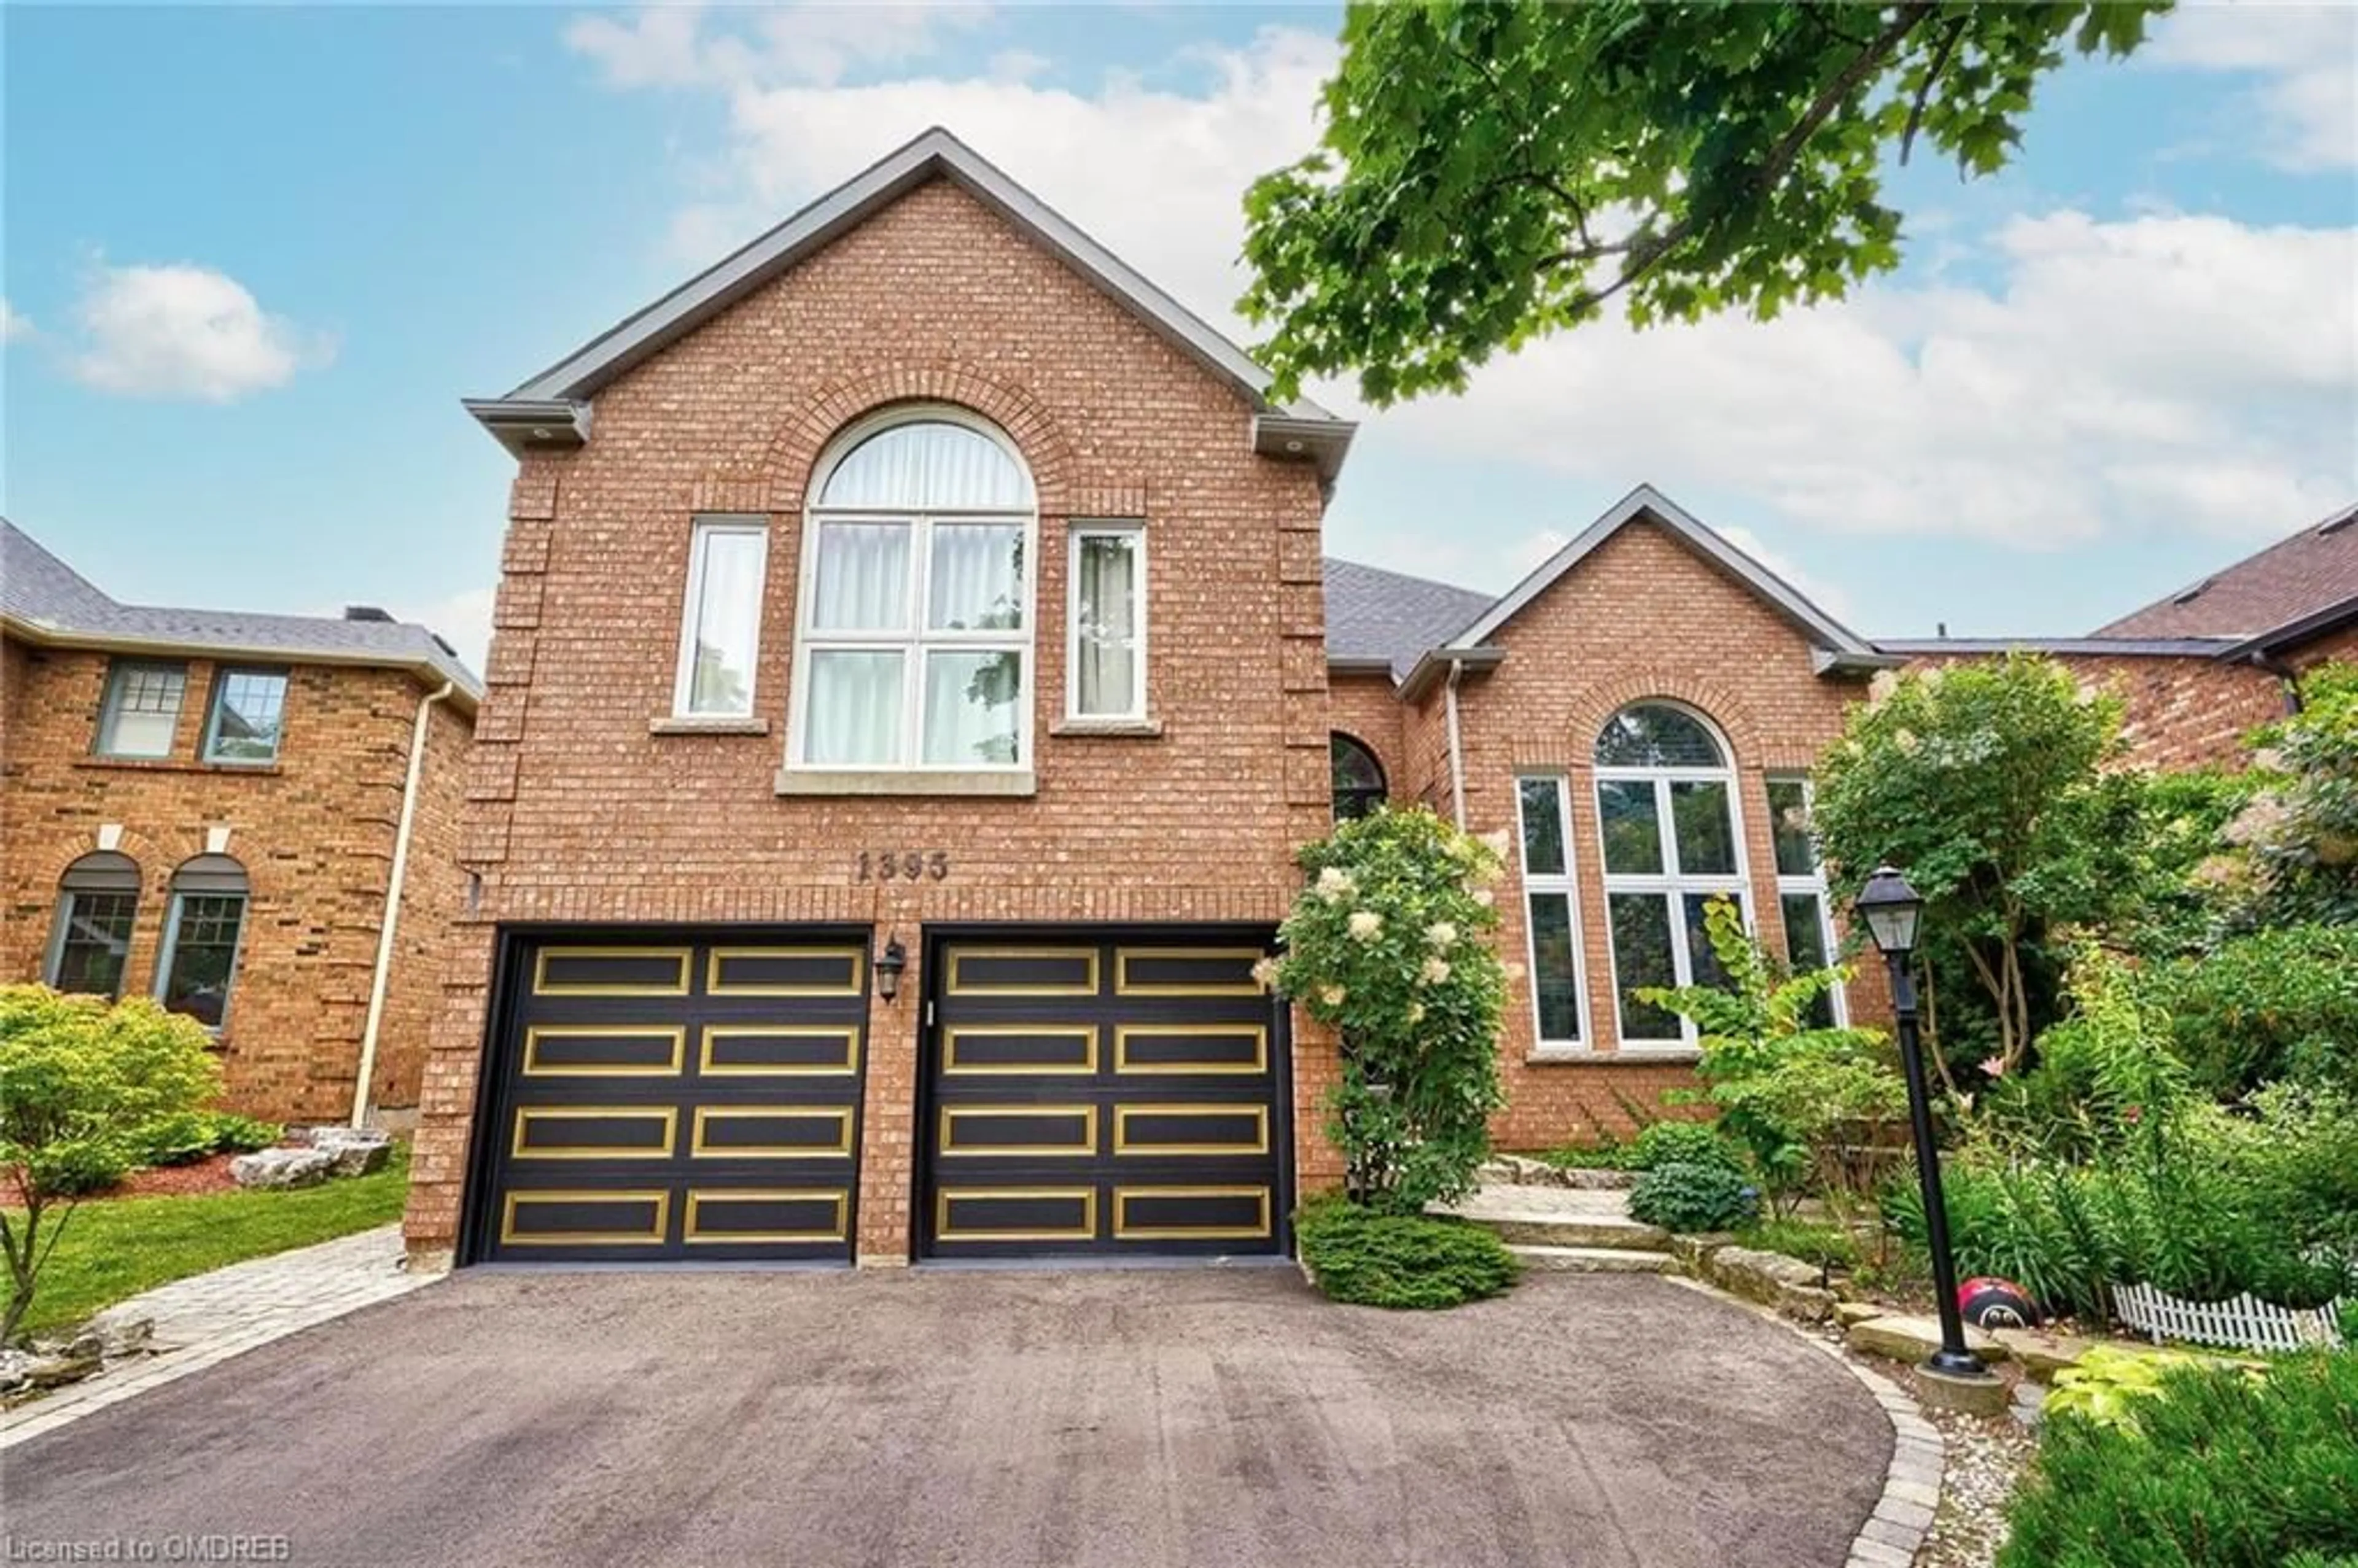 Home with brick exterior material for 1395 Silversmith Dr, Oakville Ontario L6M 2X4